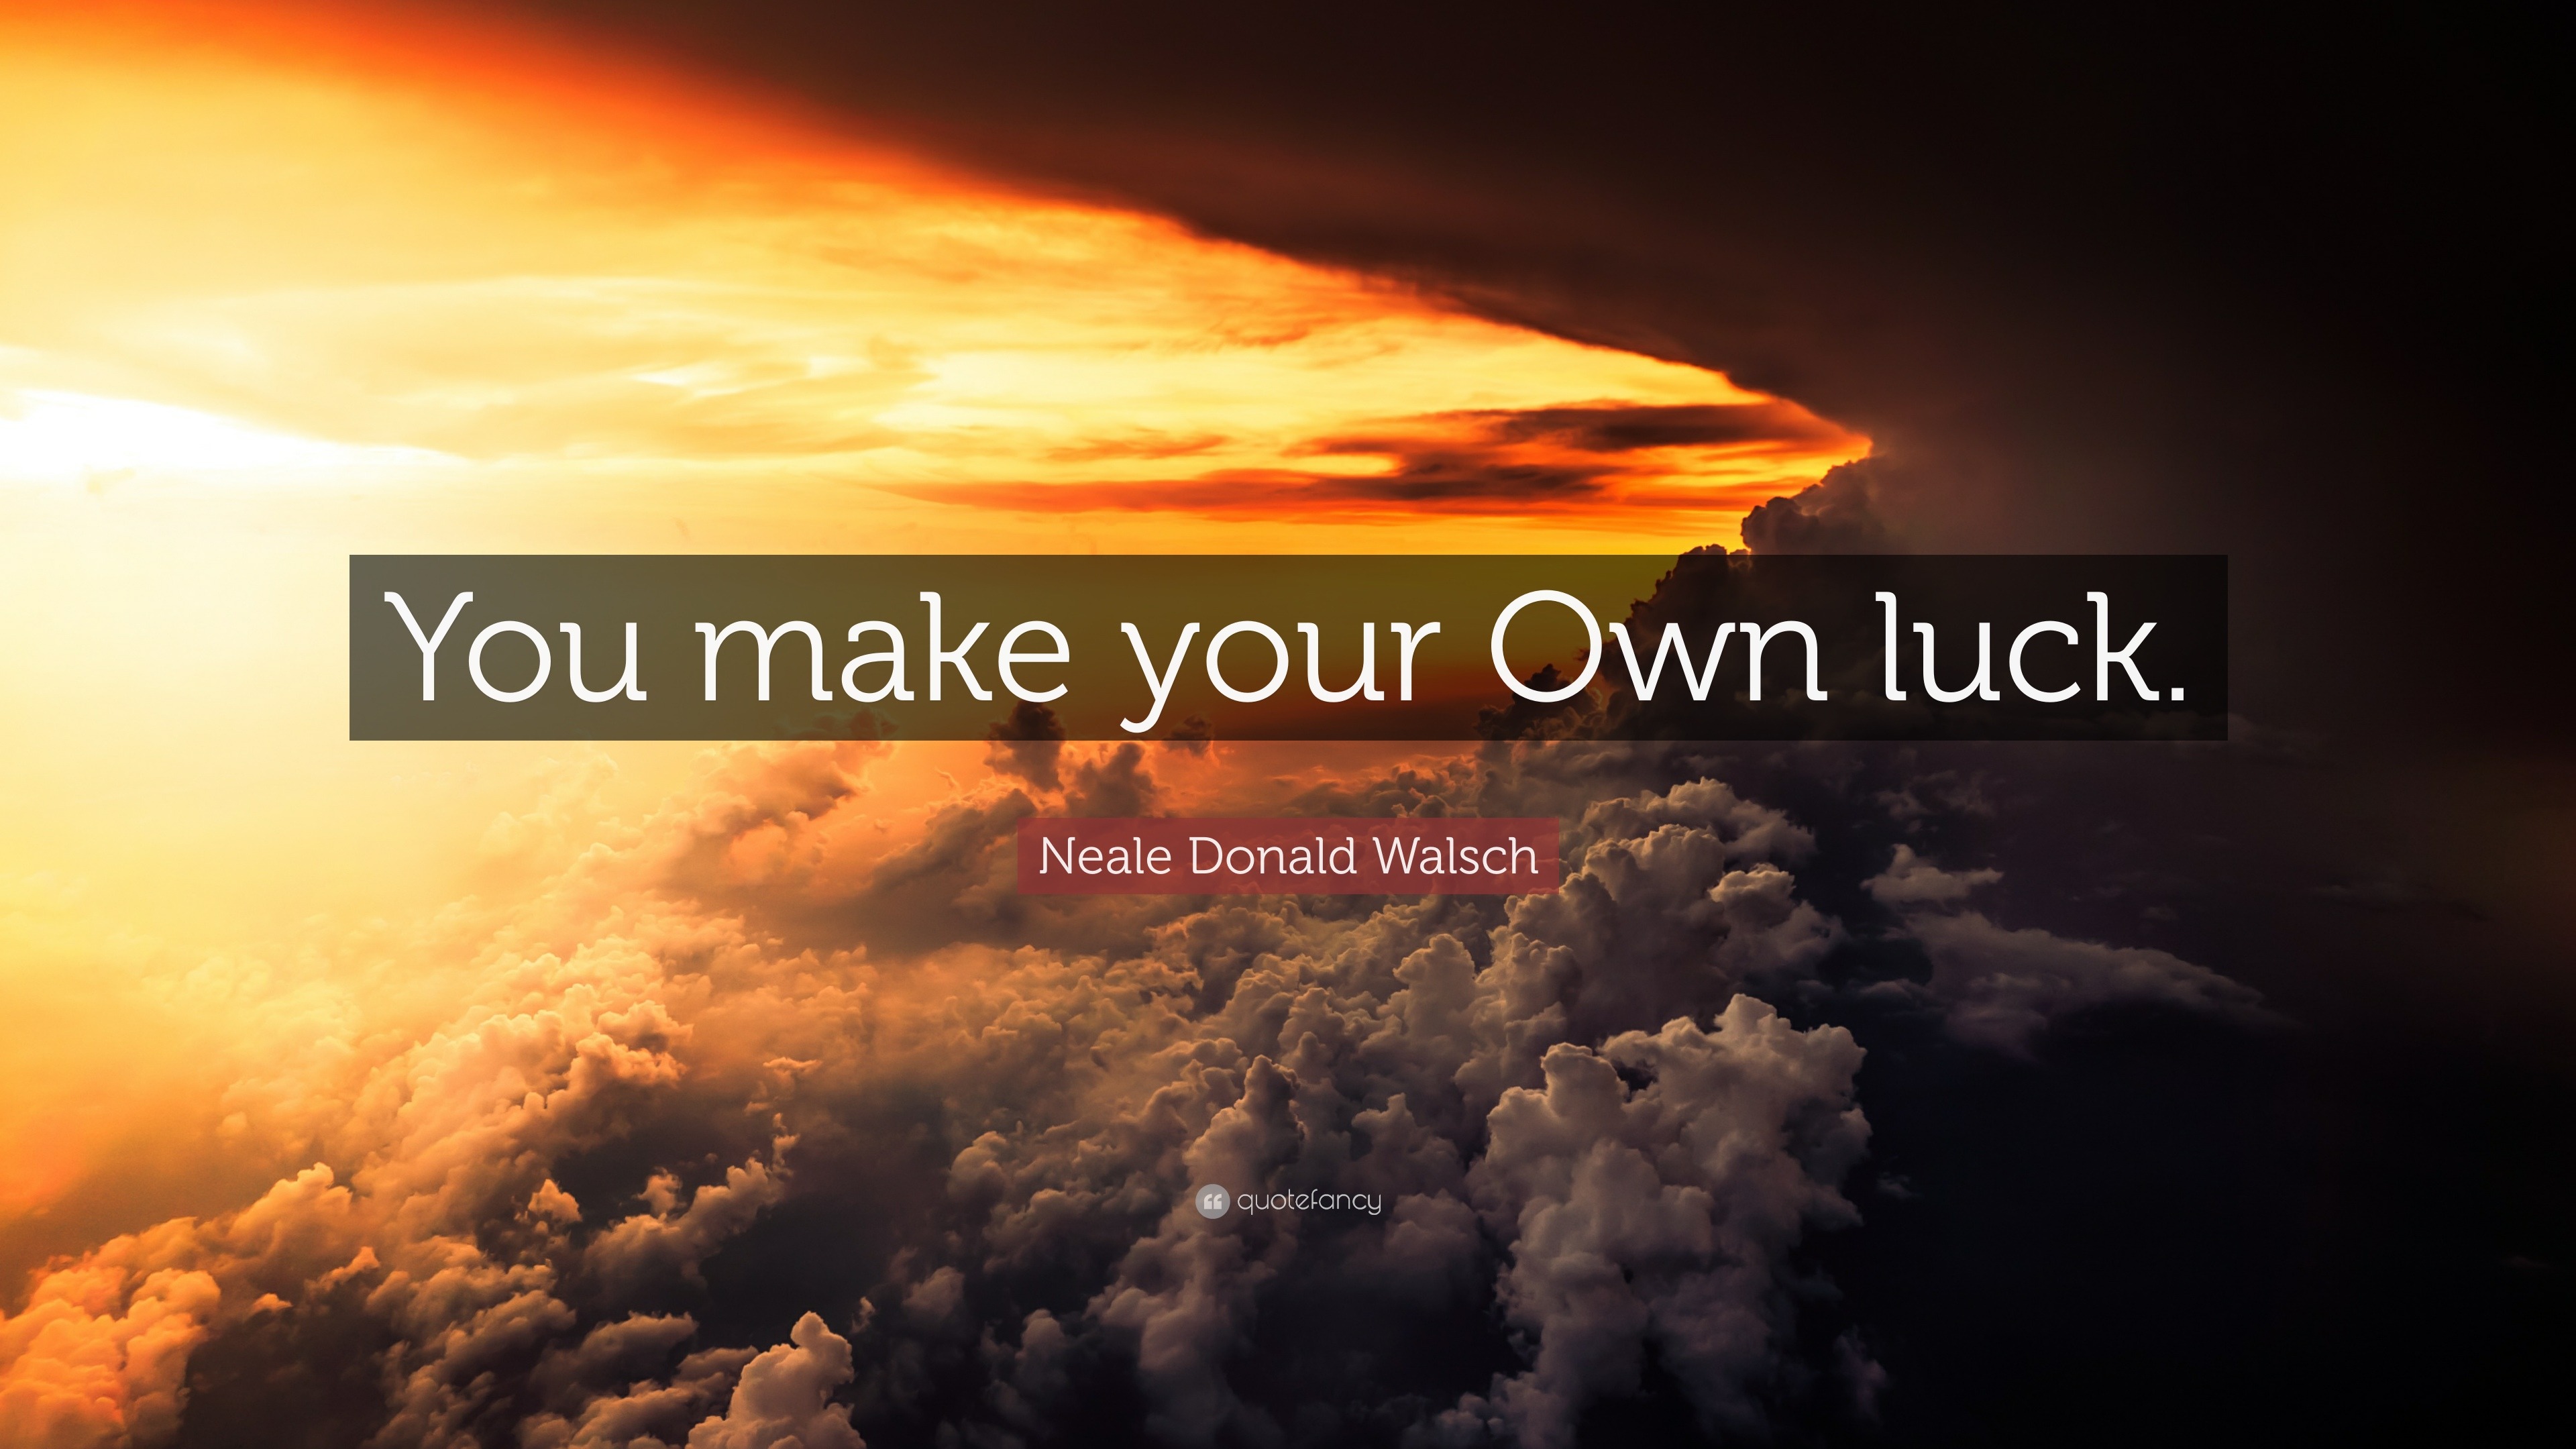 Neale Donald Walsch Quote: “You make your Own luck.”